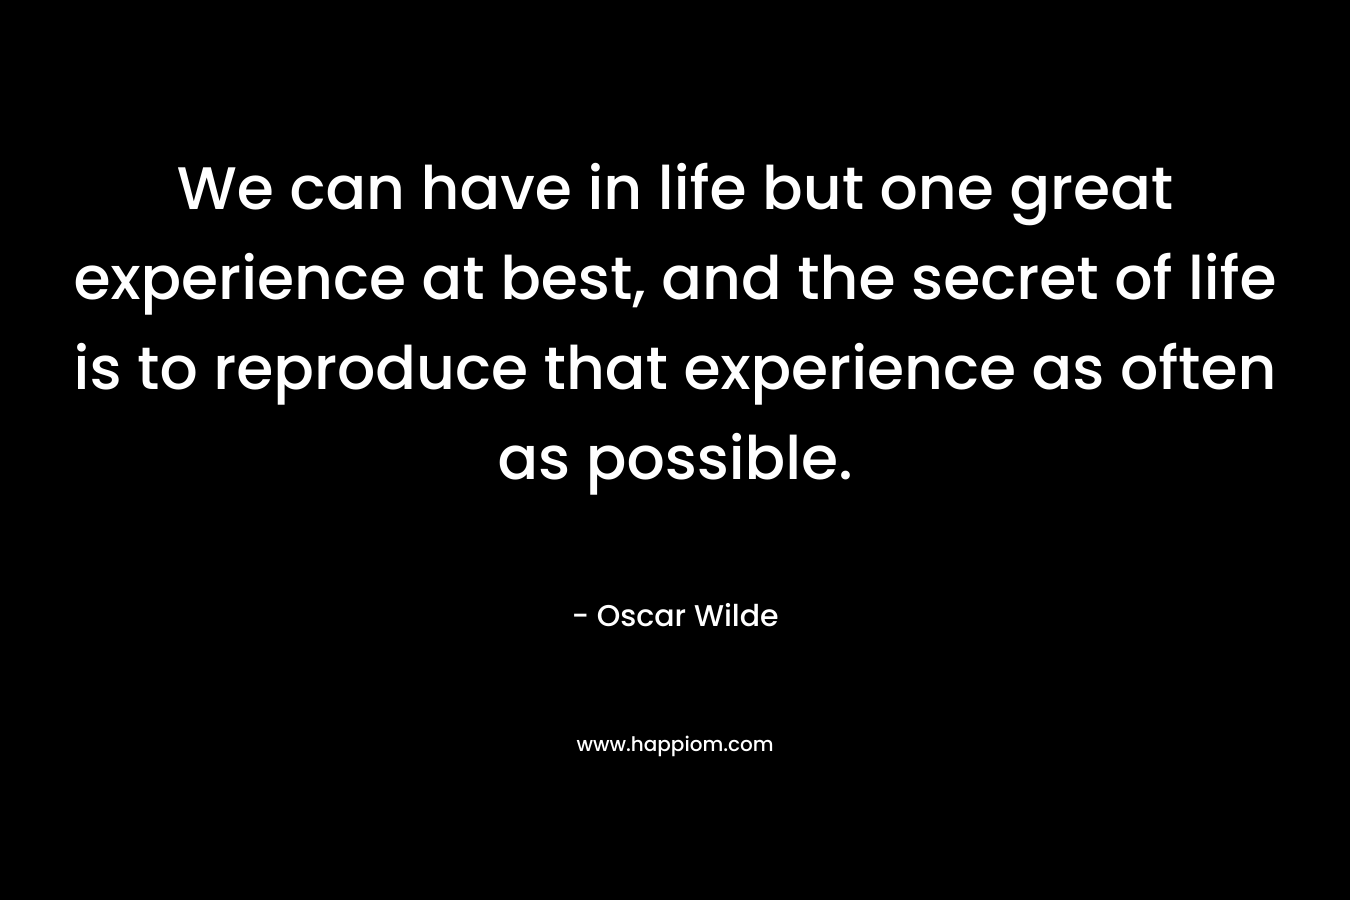 We can have in life but one great experience at best, and the secret of life is to reproduce that experience as often as possible. – Oscar Wilde